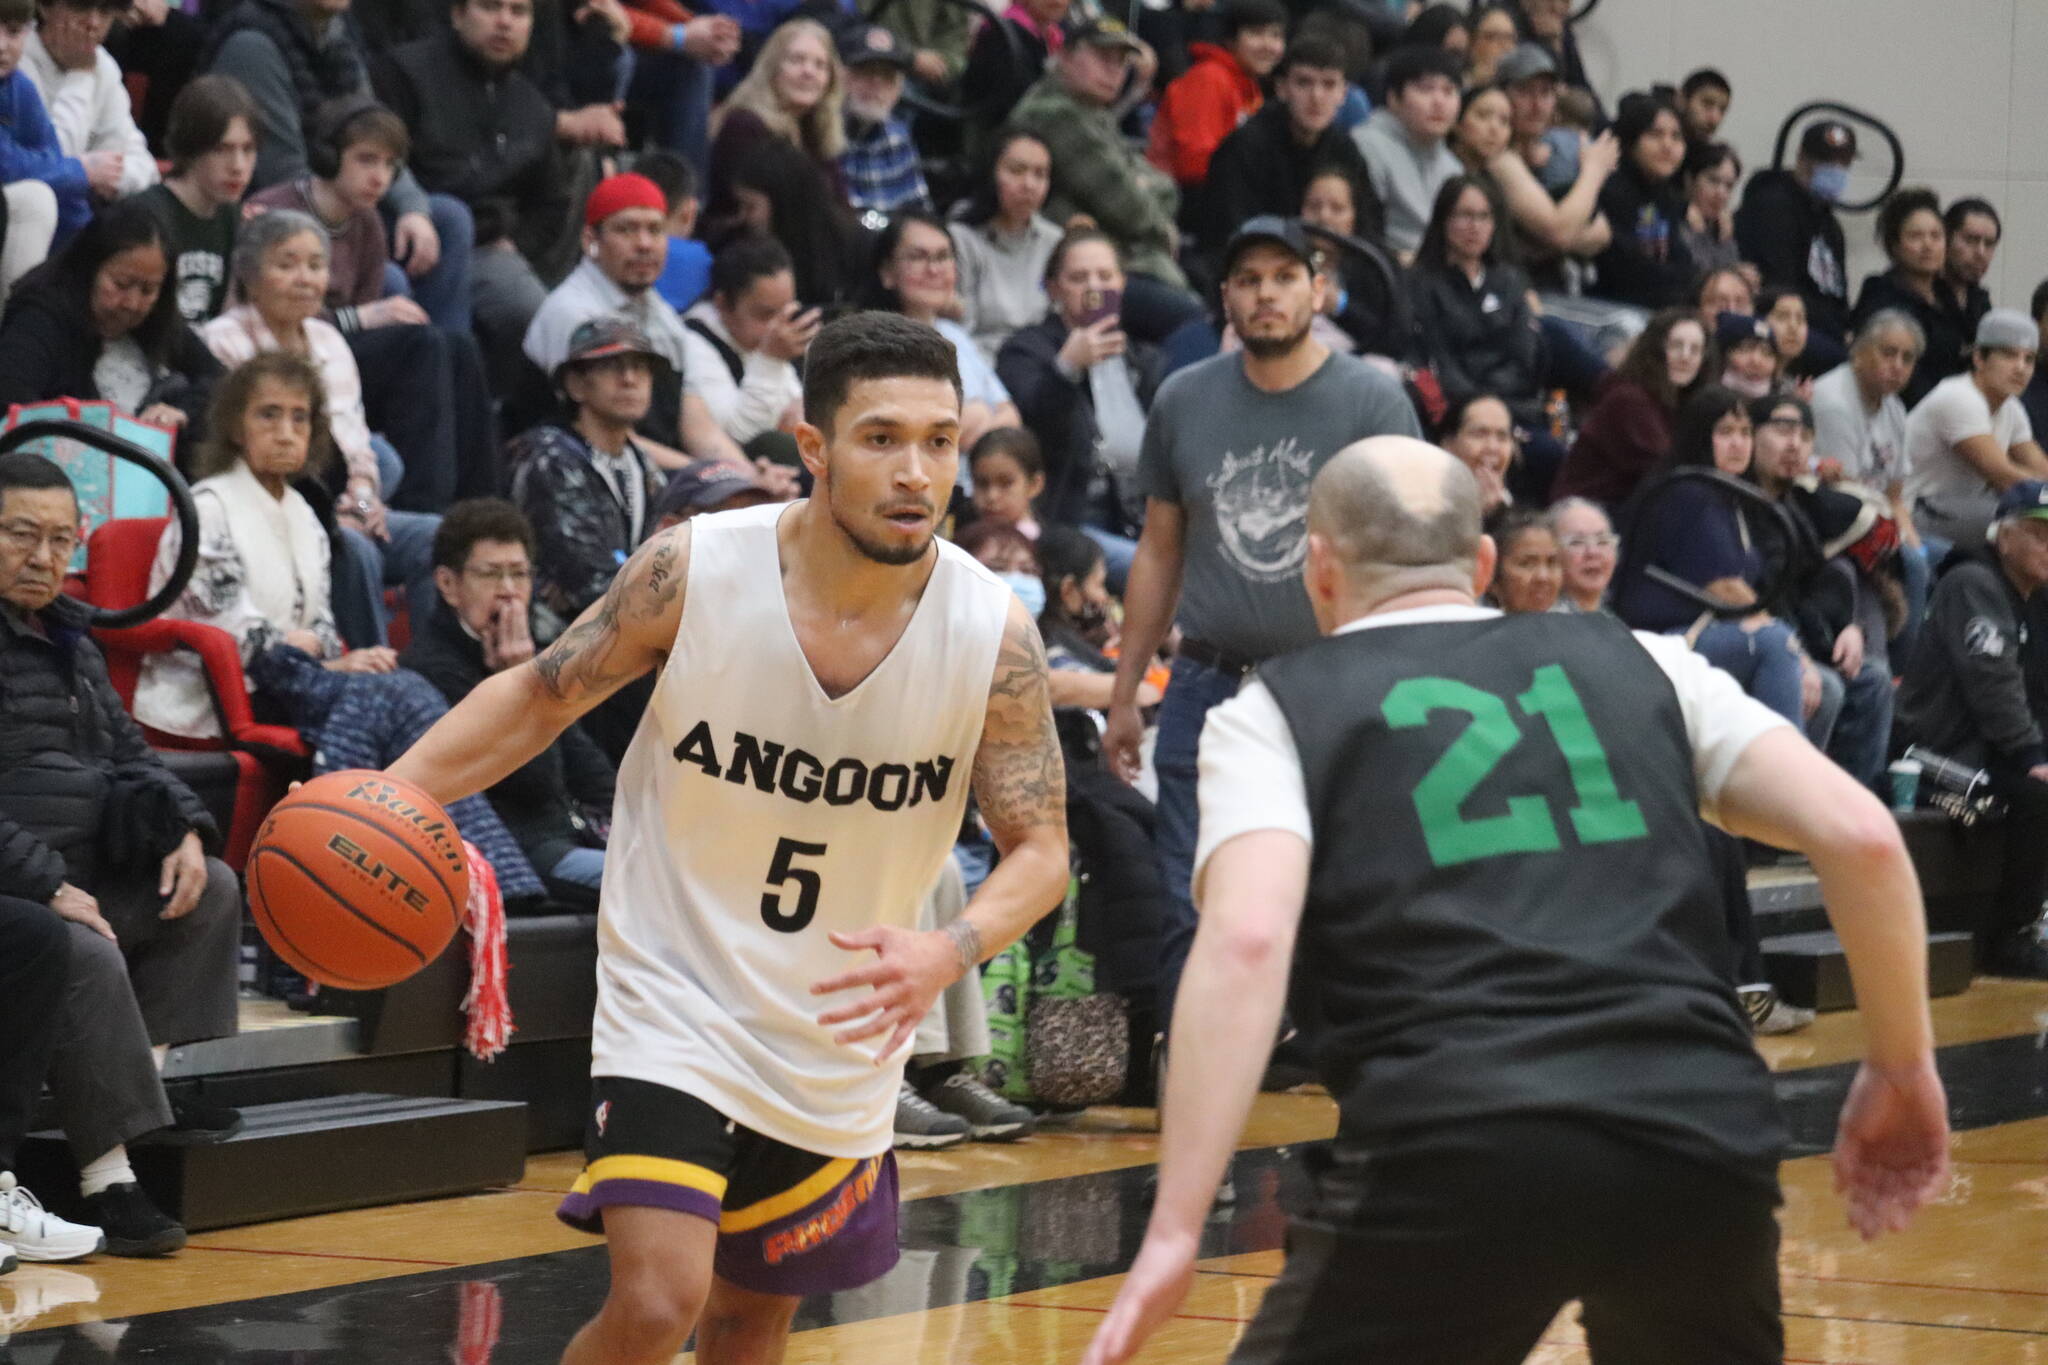 Angoon’s Aquino Brinson looks for an open pass against Haines on Thursday for an elimination game inside the B bracket for this year’s Gold Medal basketball tournament. Brinson finished the game with a total of 10 points. (Jonson Kuhn / Juneau Empire)